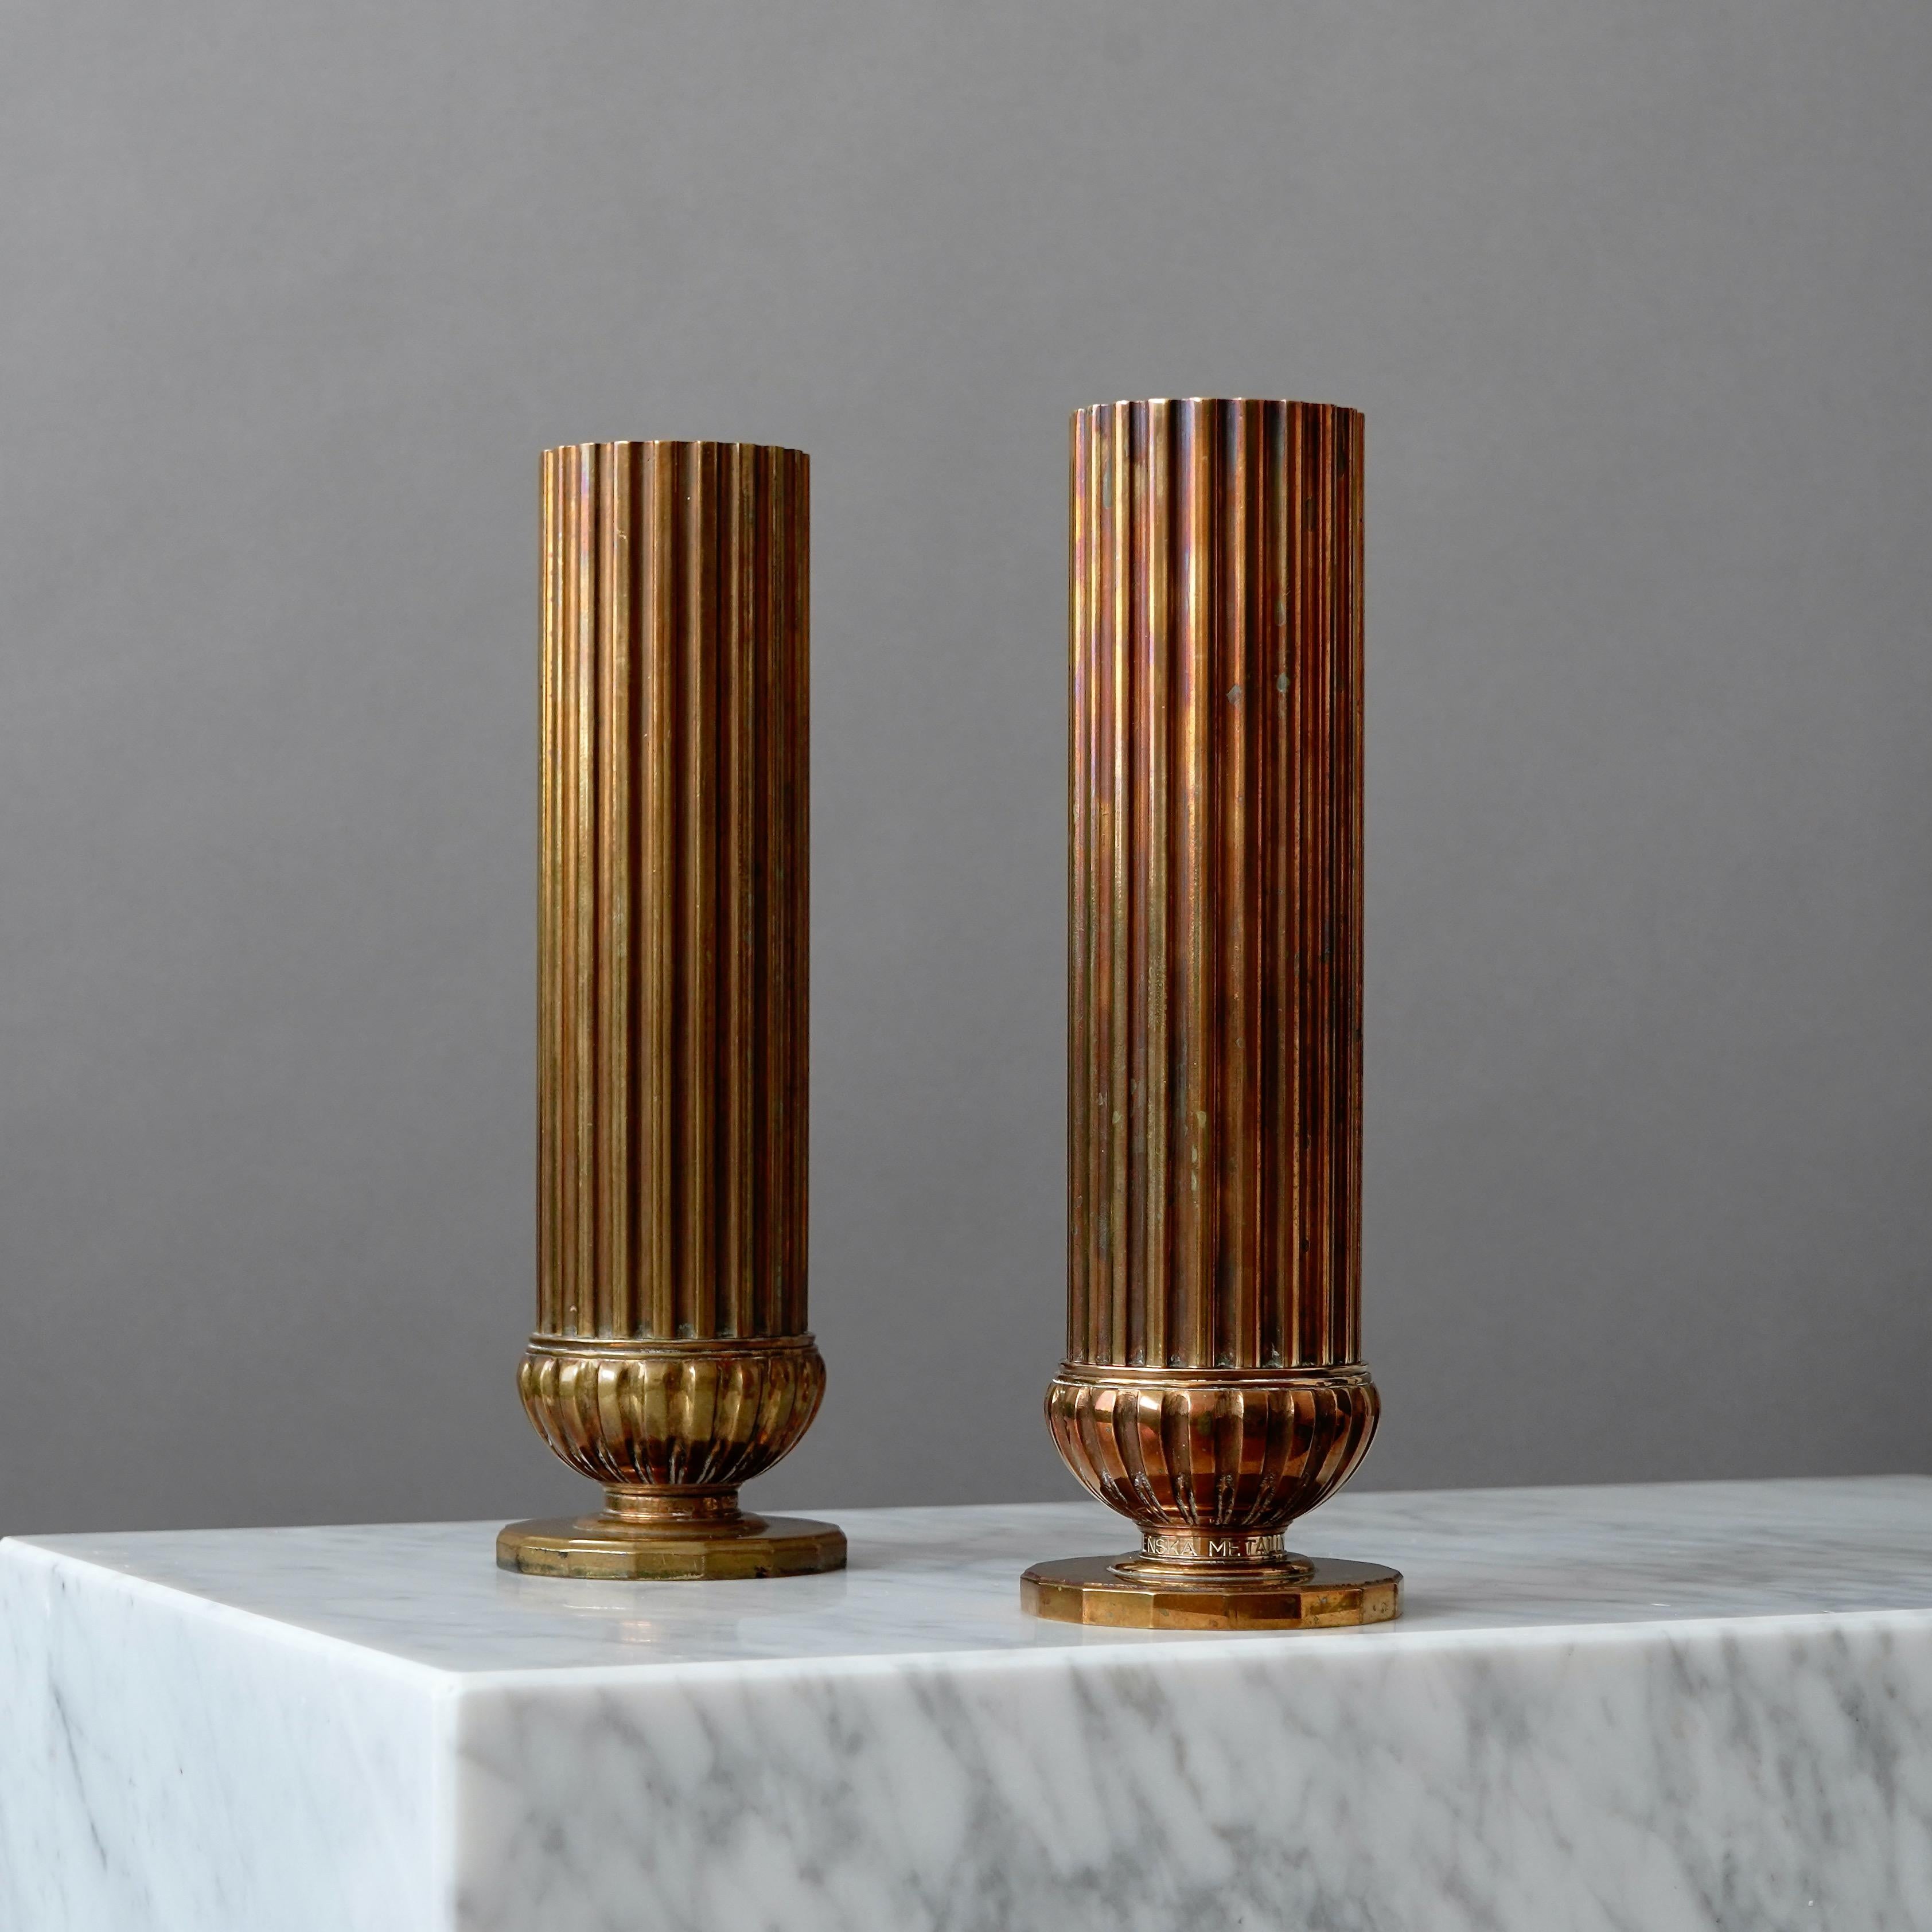 A pair of beautiful art deco bronze vases with amazing patina. 
Made by SVM, Svenska Metallverken AB, Sweden, 1930s.  

Great condition, but with inscriptions on the bases.
Stamped 'SVENSKA METALLVERKEN'.